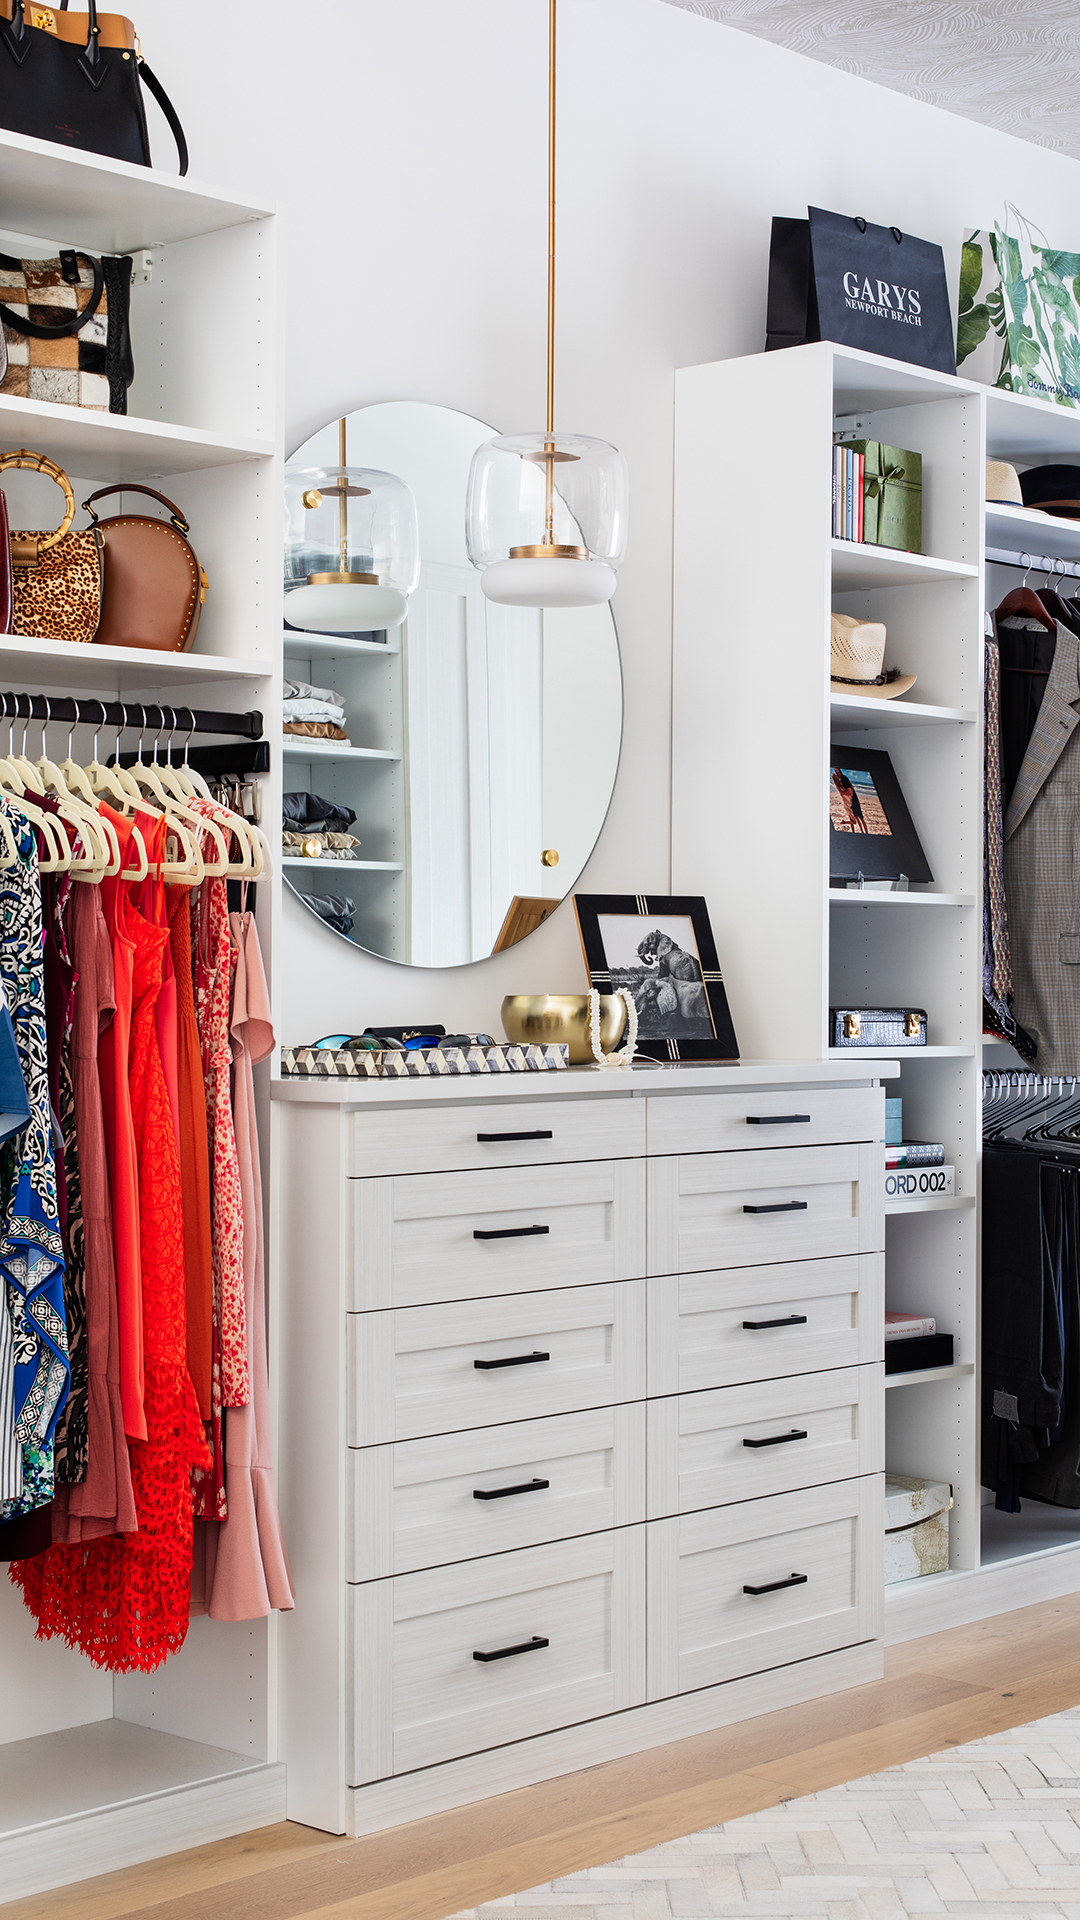 Our custom closet designs are flexible, functional, and stylish, creating a unique space in your home. Choose from accessories and features that heighten the look and functionality, individualized just for you. Include lighting, mirrors, dresser drawers and hampers to fully outfit your space. Discover versatile solutions for your home today!